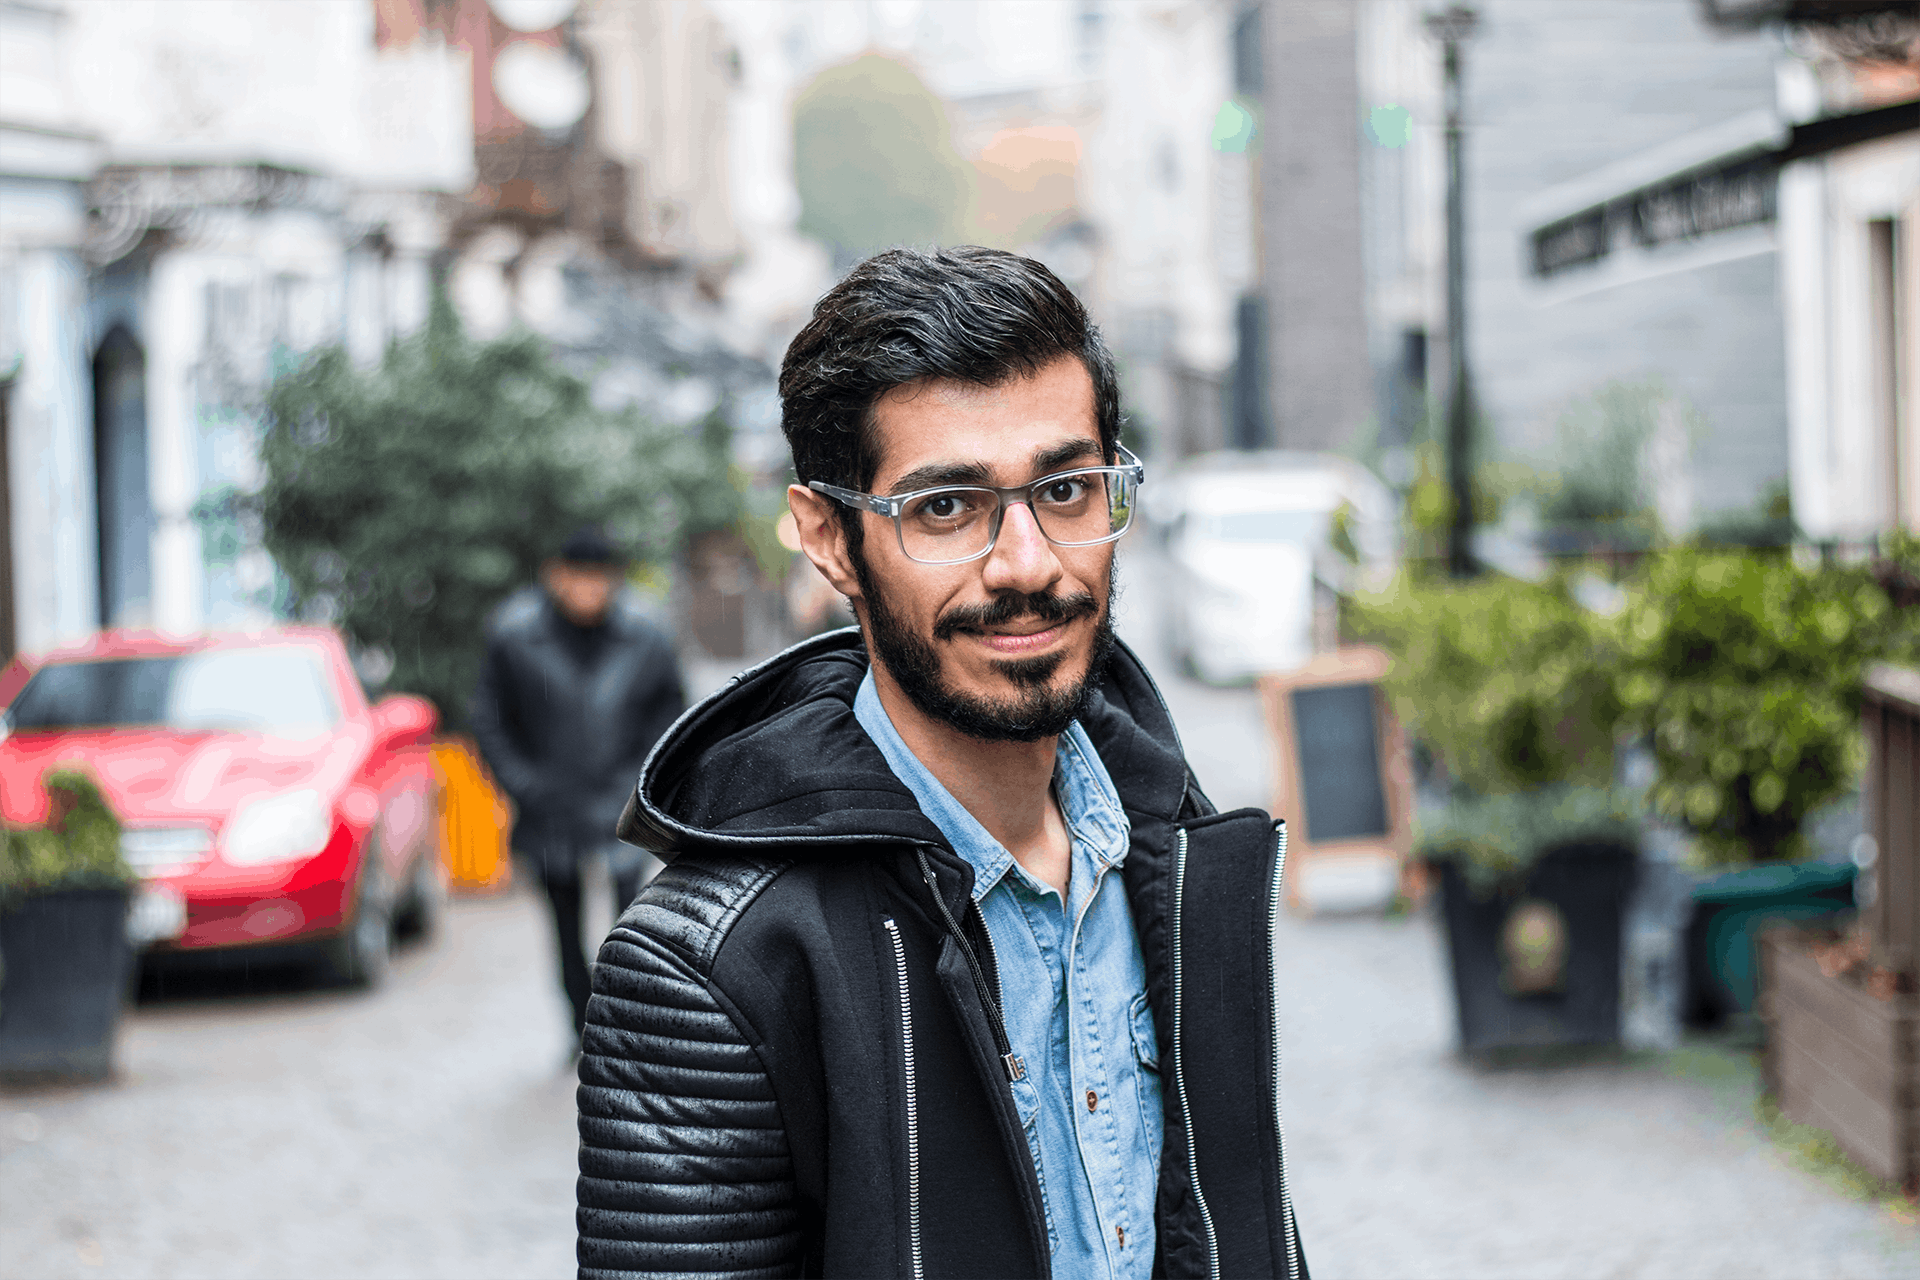 a man wearing glasses standing in the middle of a street, a picture, hurufiyya, wearing a jeans jackets, smiling and looking directly, raden saleh, profile image